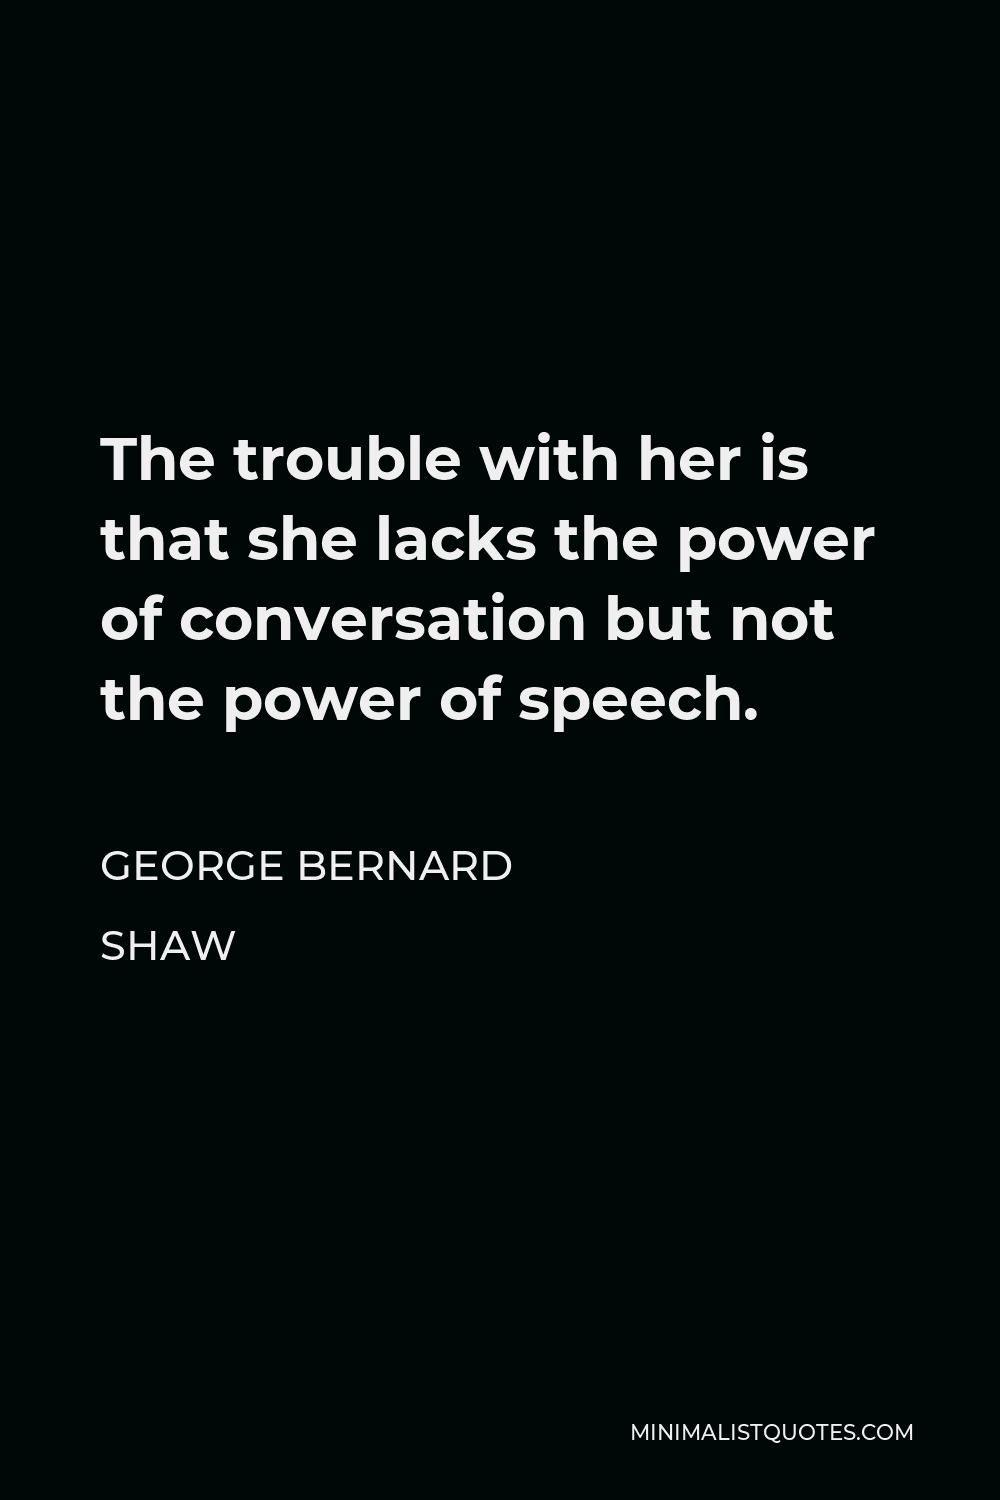 George Bernard Shaw Quote - The trouble with her is that she lacks the power of conversation but not the power of speech.